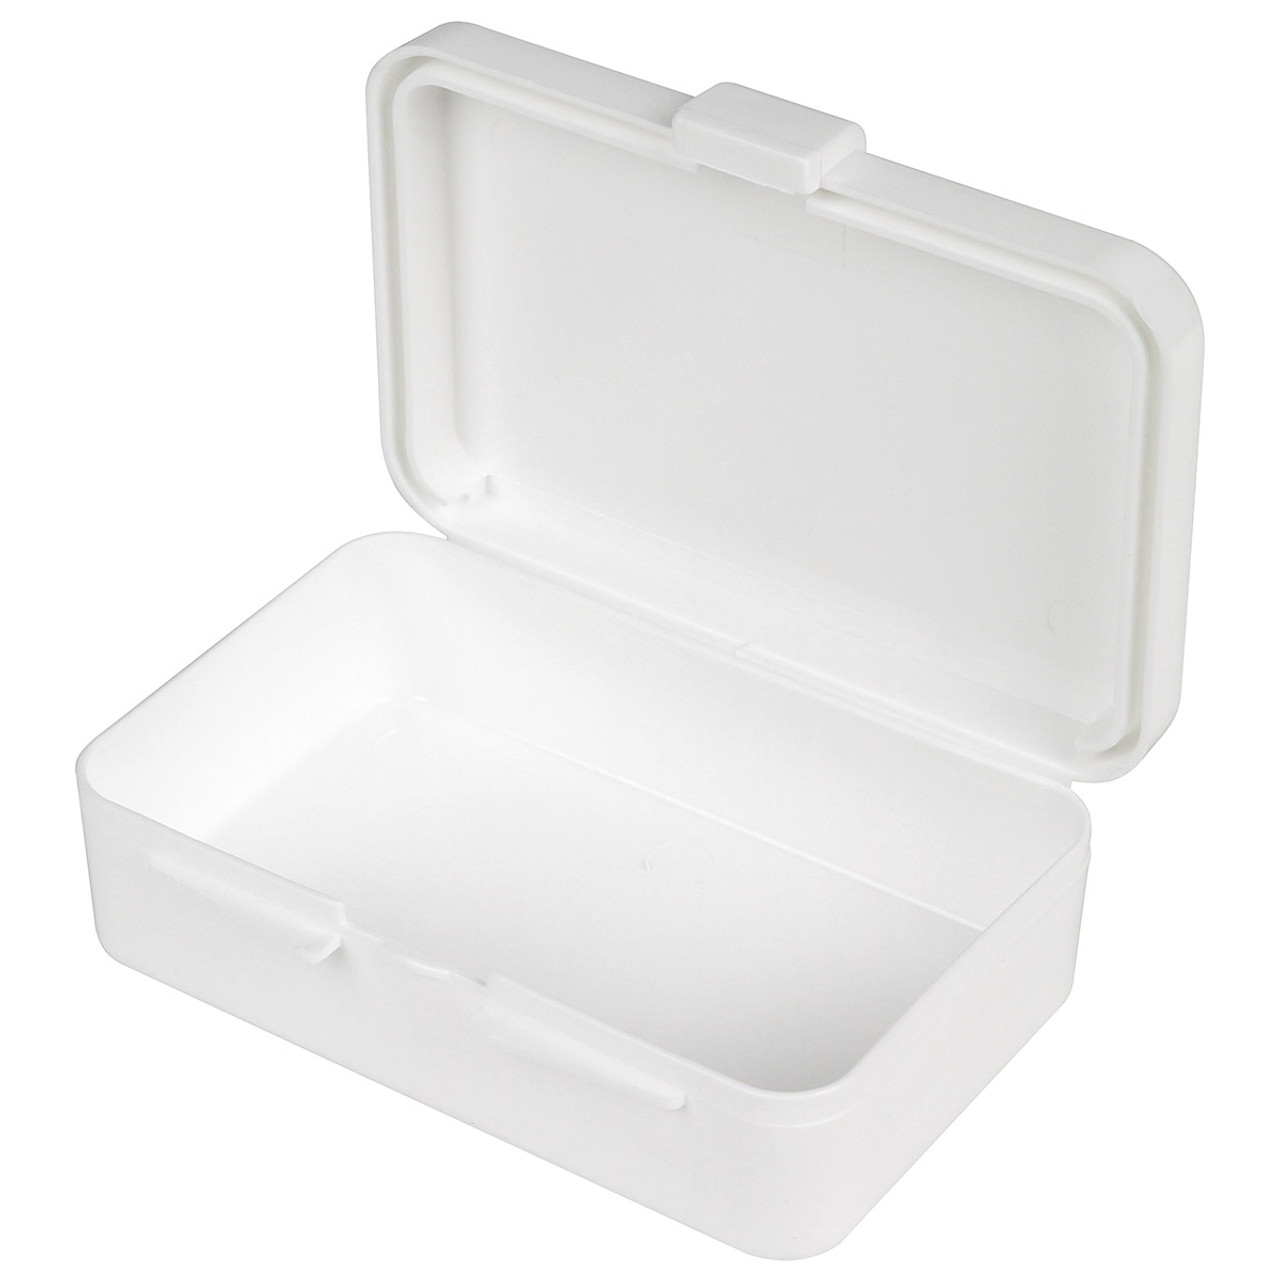 Plastic Case 2.5'' x 3.5'' x 1.25'' - EMT Bags, Backpacks and First Aid Kit  Containers